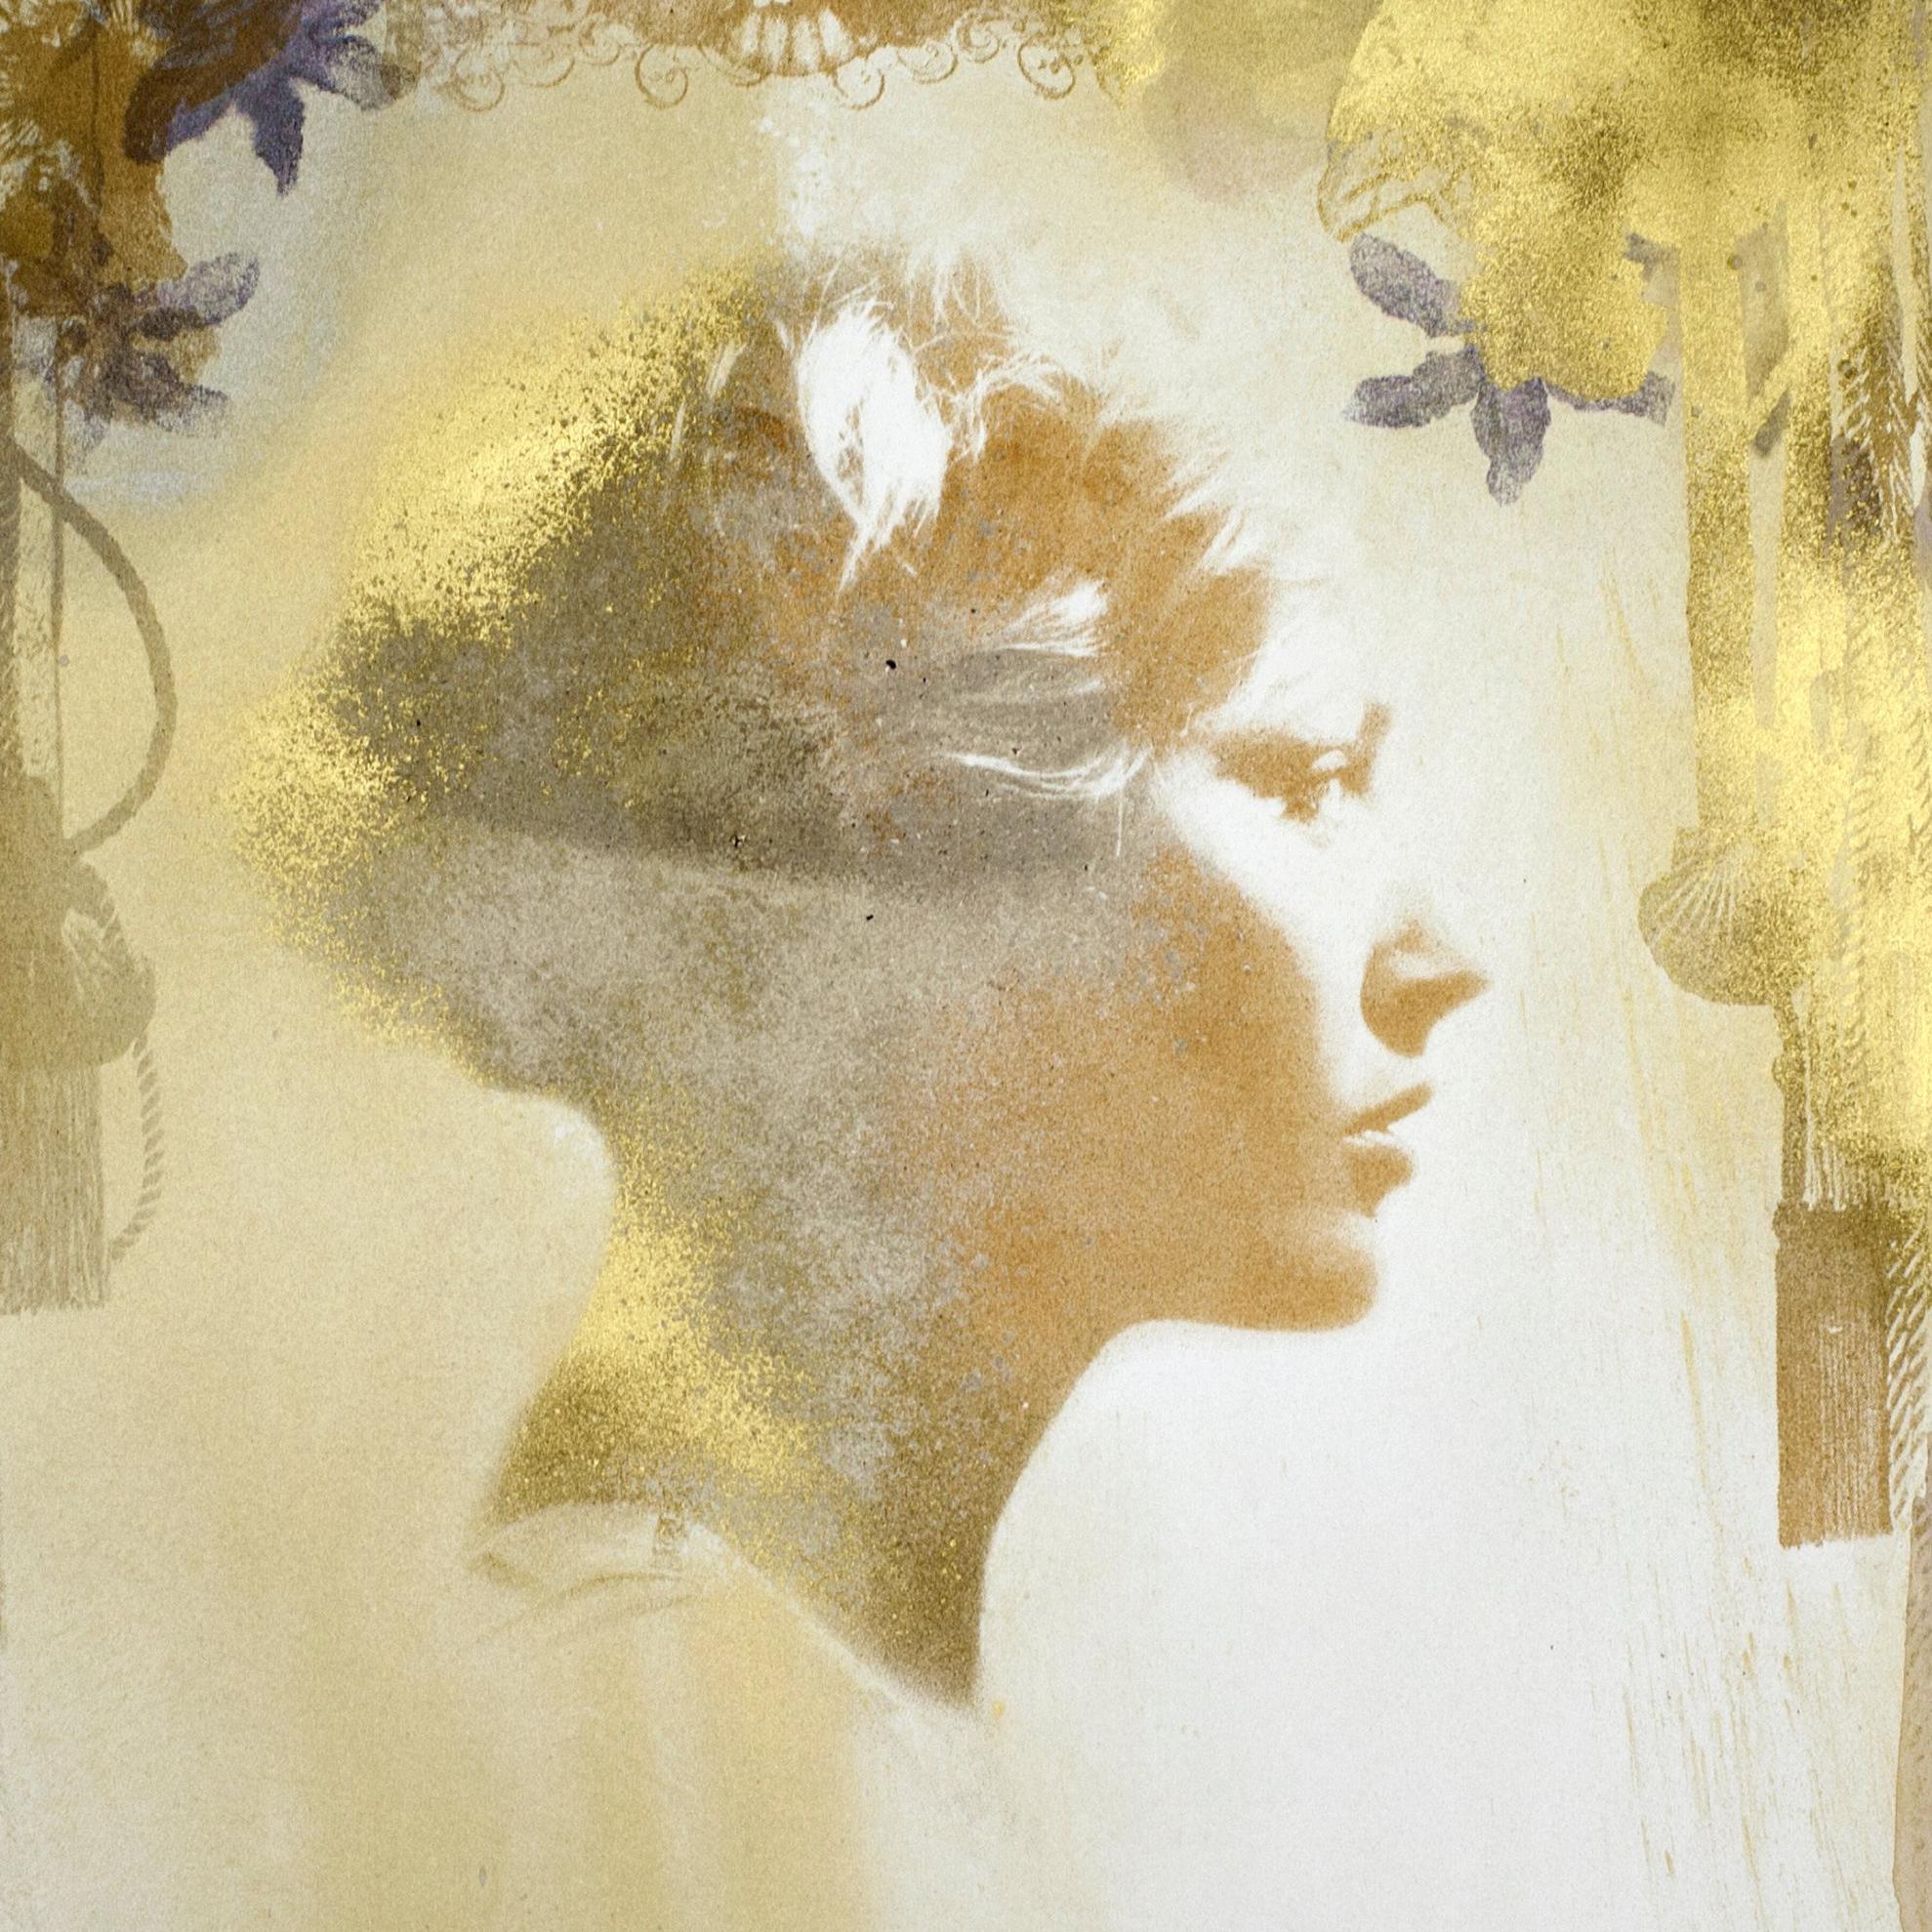 Sophie # 5, hand painted mixed media portrait photography on paper, framed - Photograph by Rosie Emerson